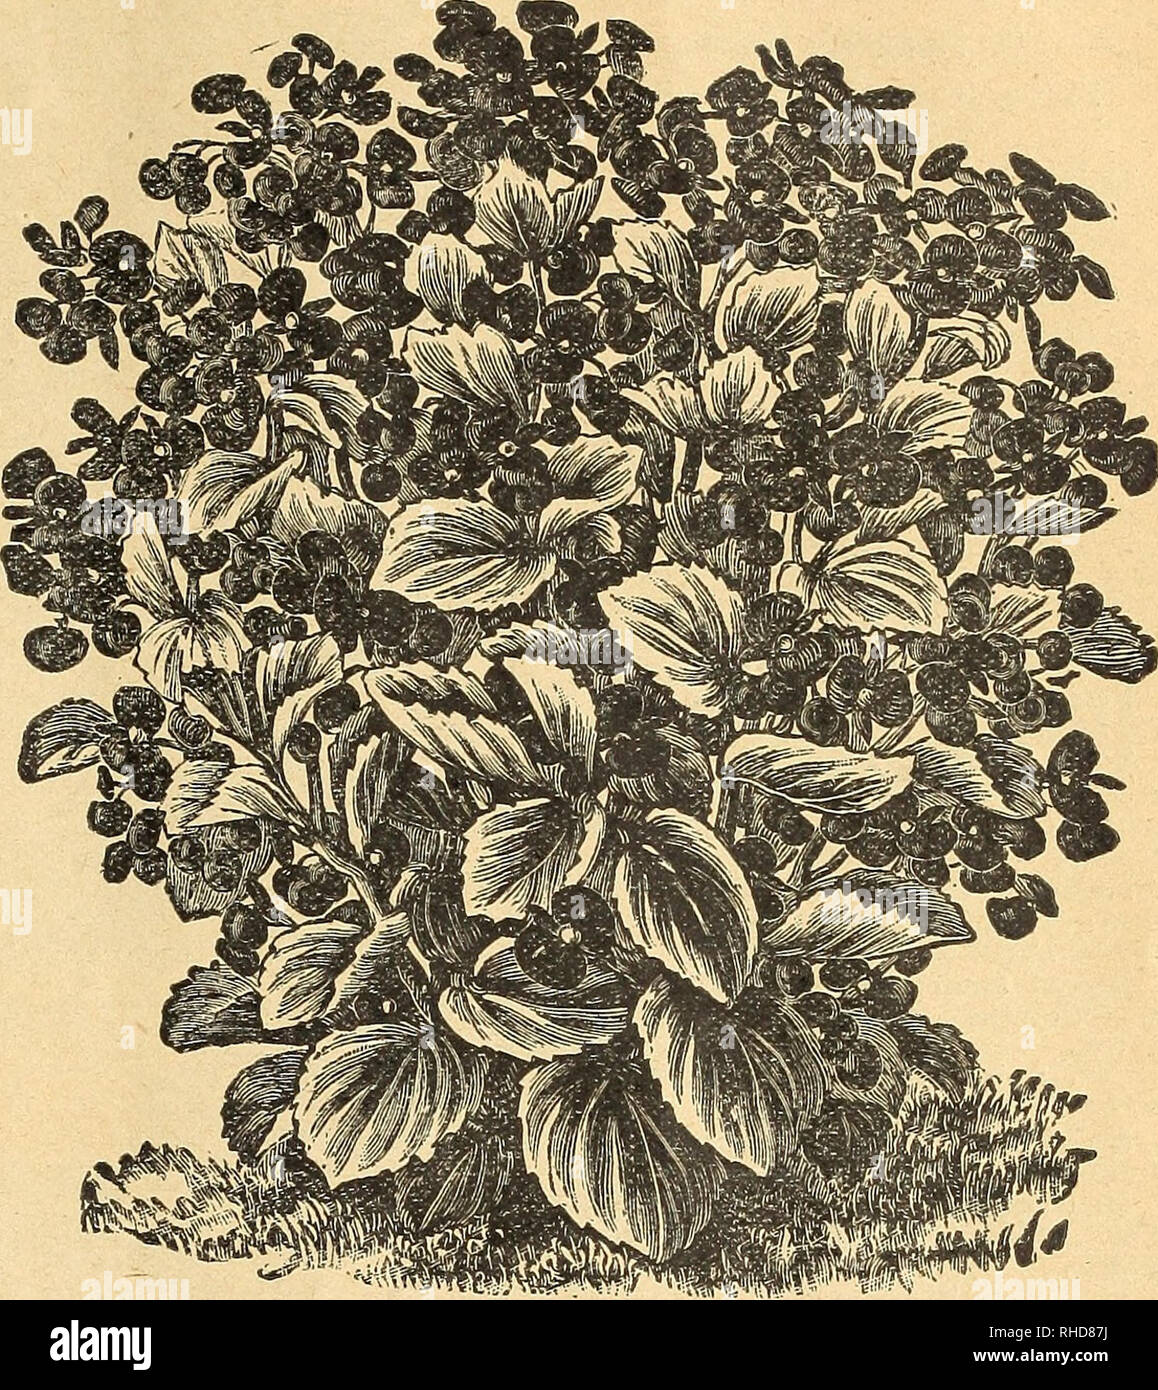 . Book of flowers from Miss Martha Hiser, seedswoman and florist. Seed industry and trade; Seeds; Flowers; Plants, Ornamental. SEEDSWOMAN AND FLORIST*. 29 BEGONIAS, FLOWERING VARIETIES. Argentea Guttatta—Leaves oblong in shape, of a purplish bronze color, white markings; white flowers. One of the hardiest varieties. Alba Picta Rosea—This is a seedling of Alba Picta crossed with Rubra. Foliage rich green, spot- ted with white, flowers on long, pendant stem simi- lar to Rubra. Color, delicate rose, very free flower- ing, very fine. Price, 10 cents each. Alba Perfecta —Identical with Rubra, excep Stock Photo